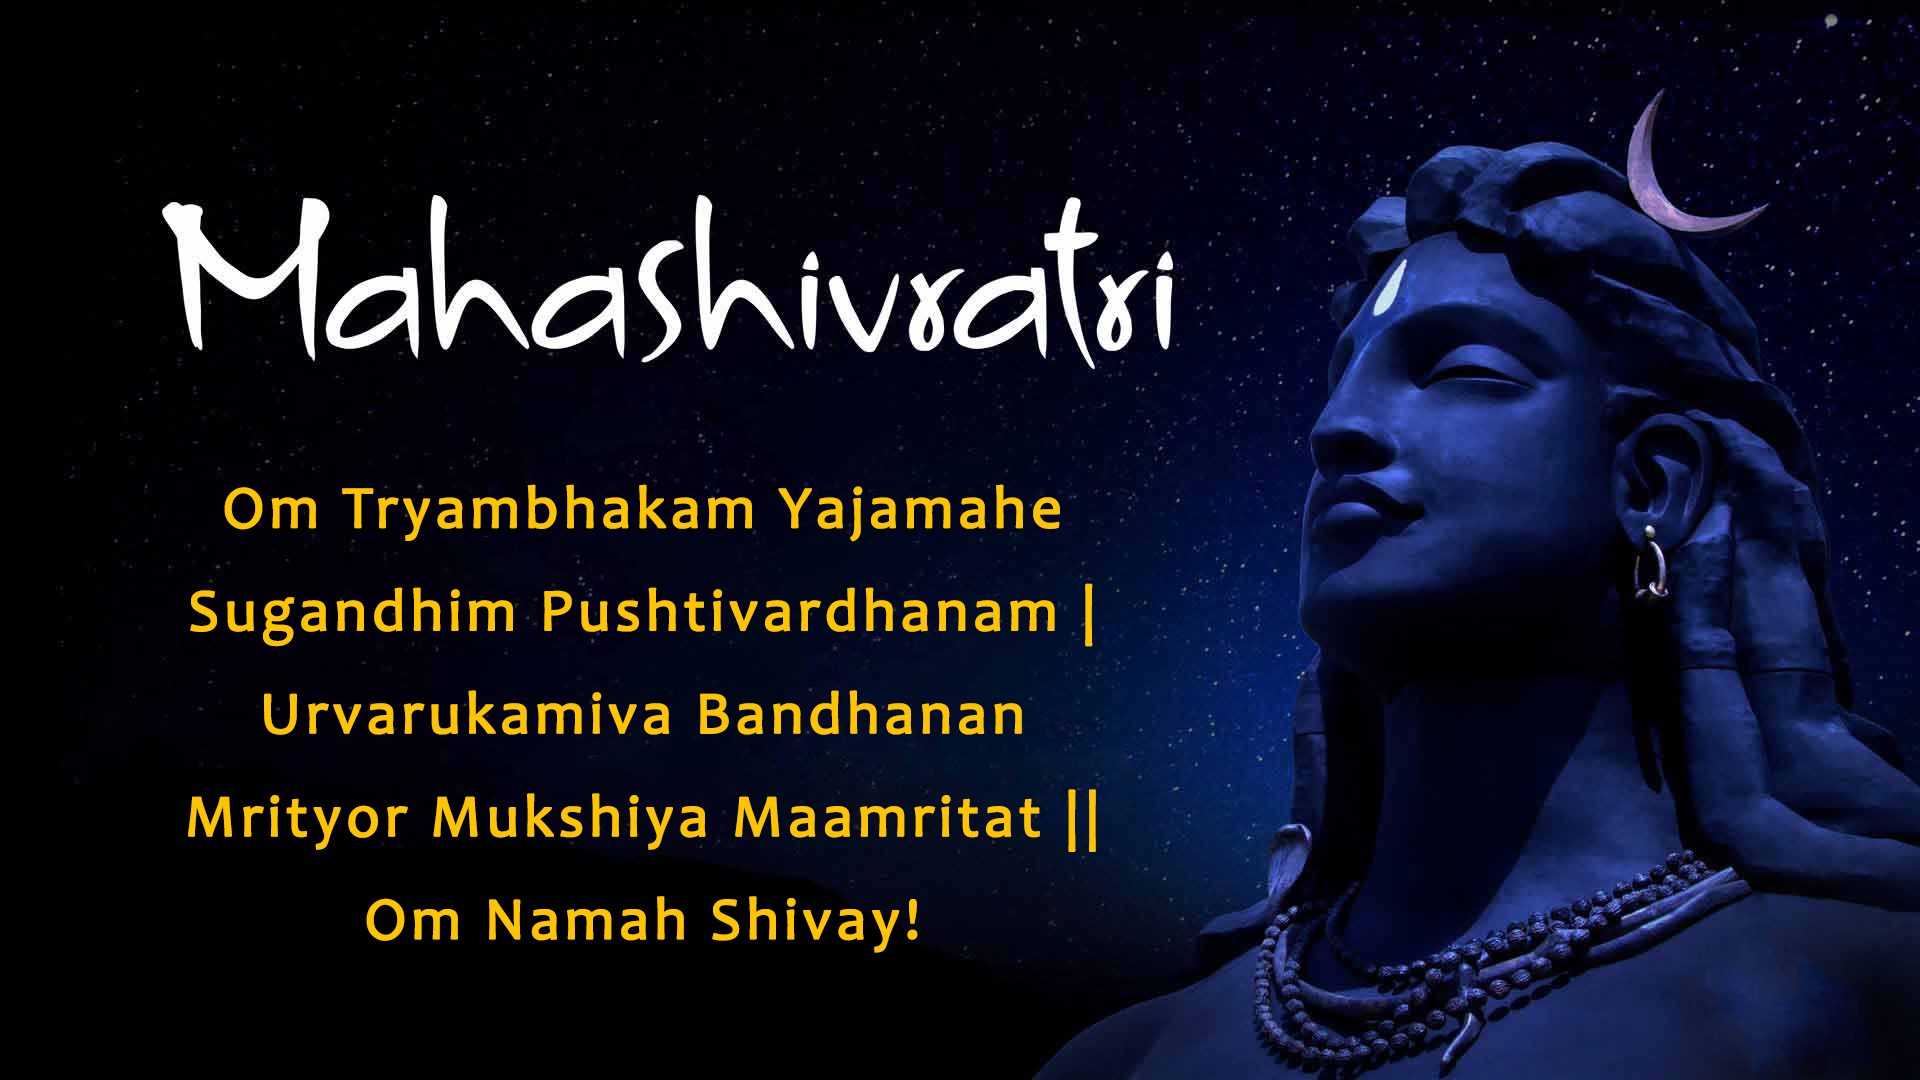 Featured image of post Full Hd Mahashivratri Wallpaper Download hd wallpapers 1080p from wallpaperfx download full high definition wallpapers at 1920x1080 size